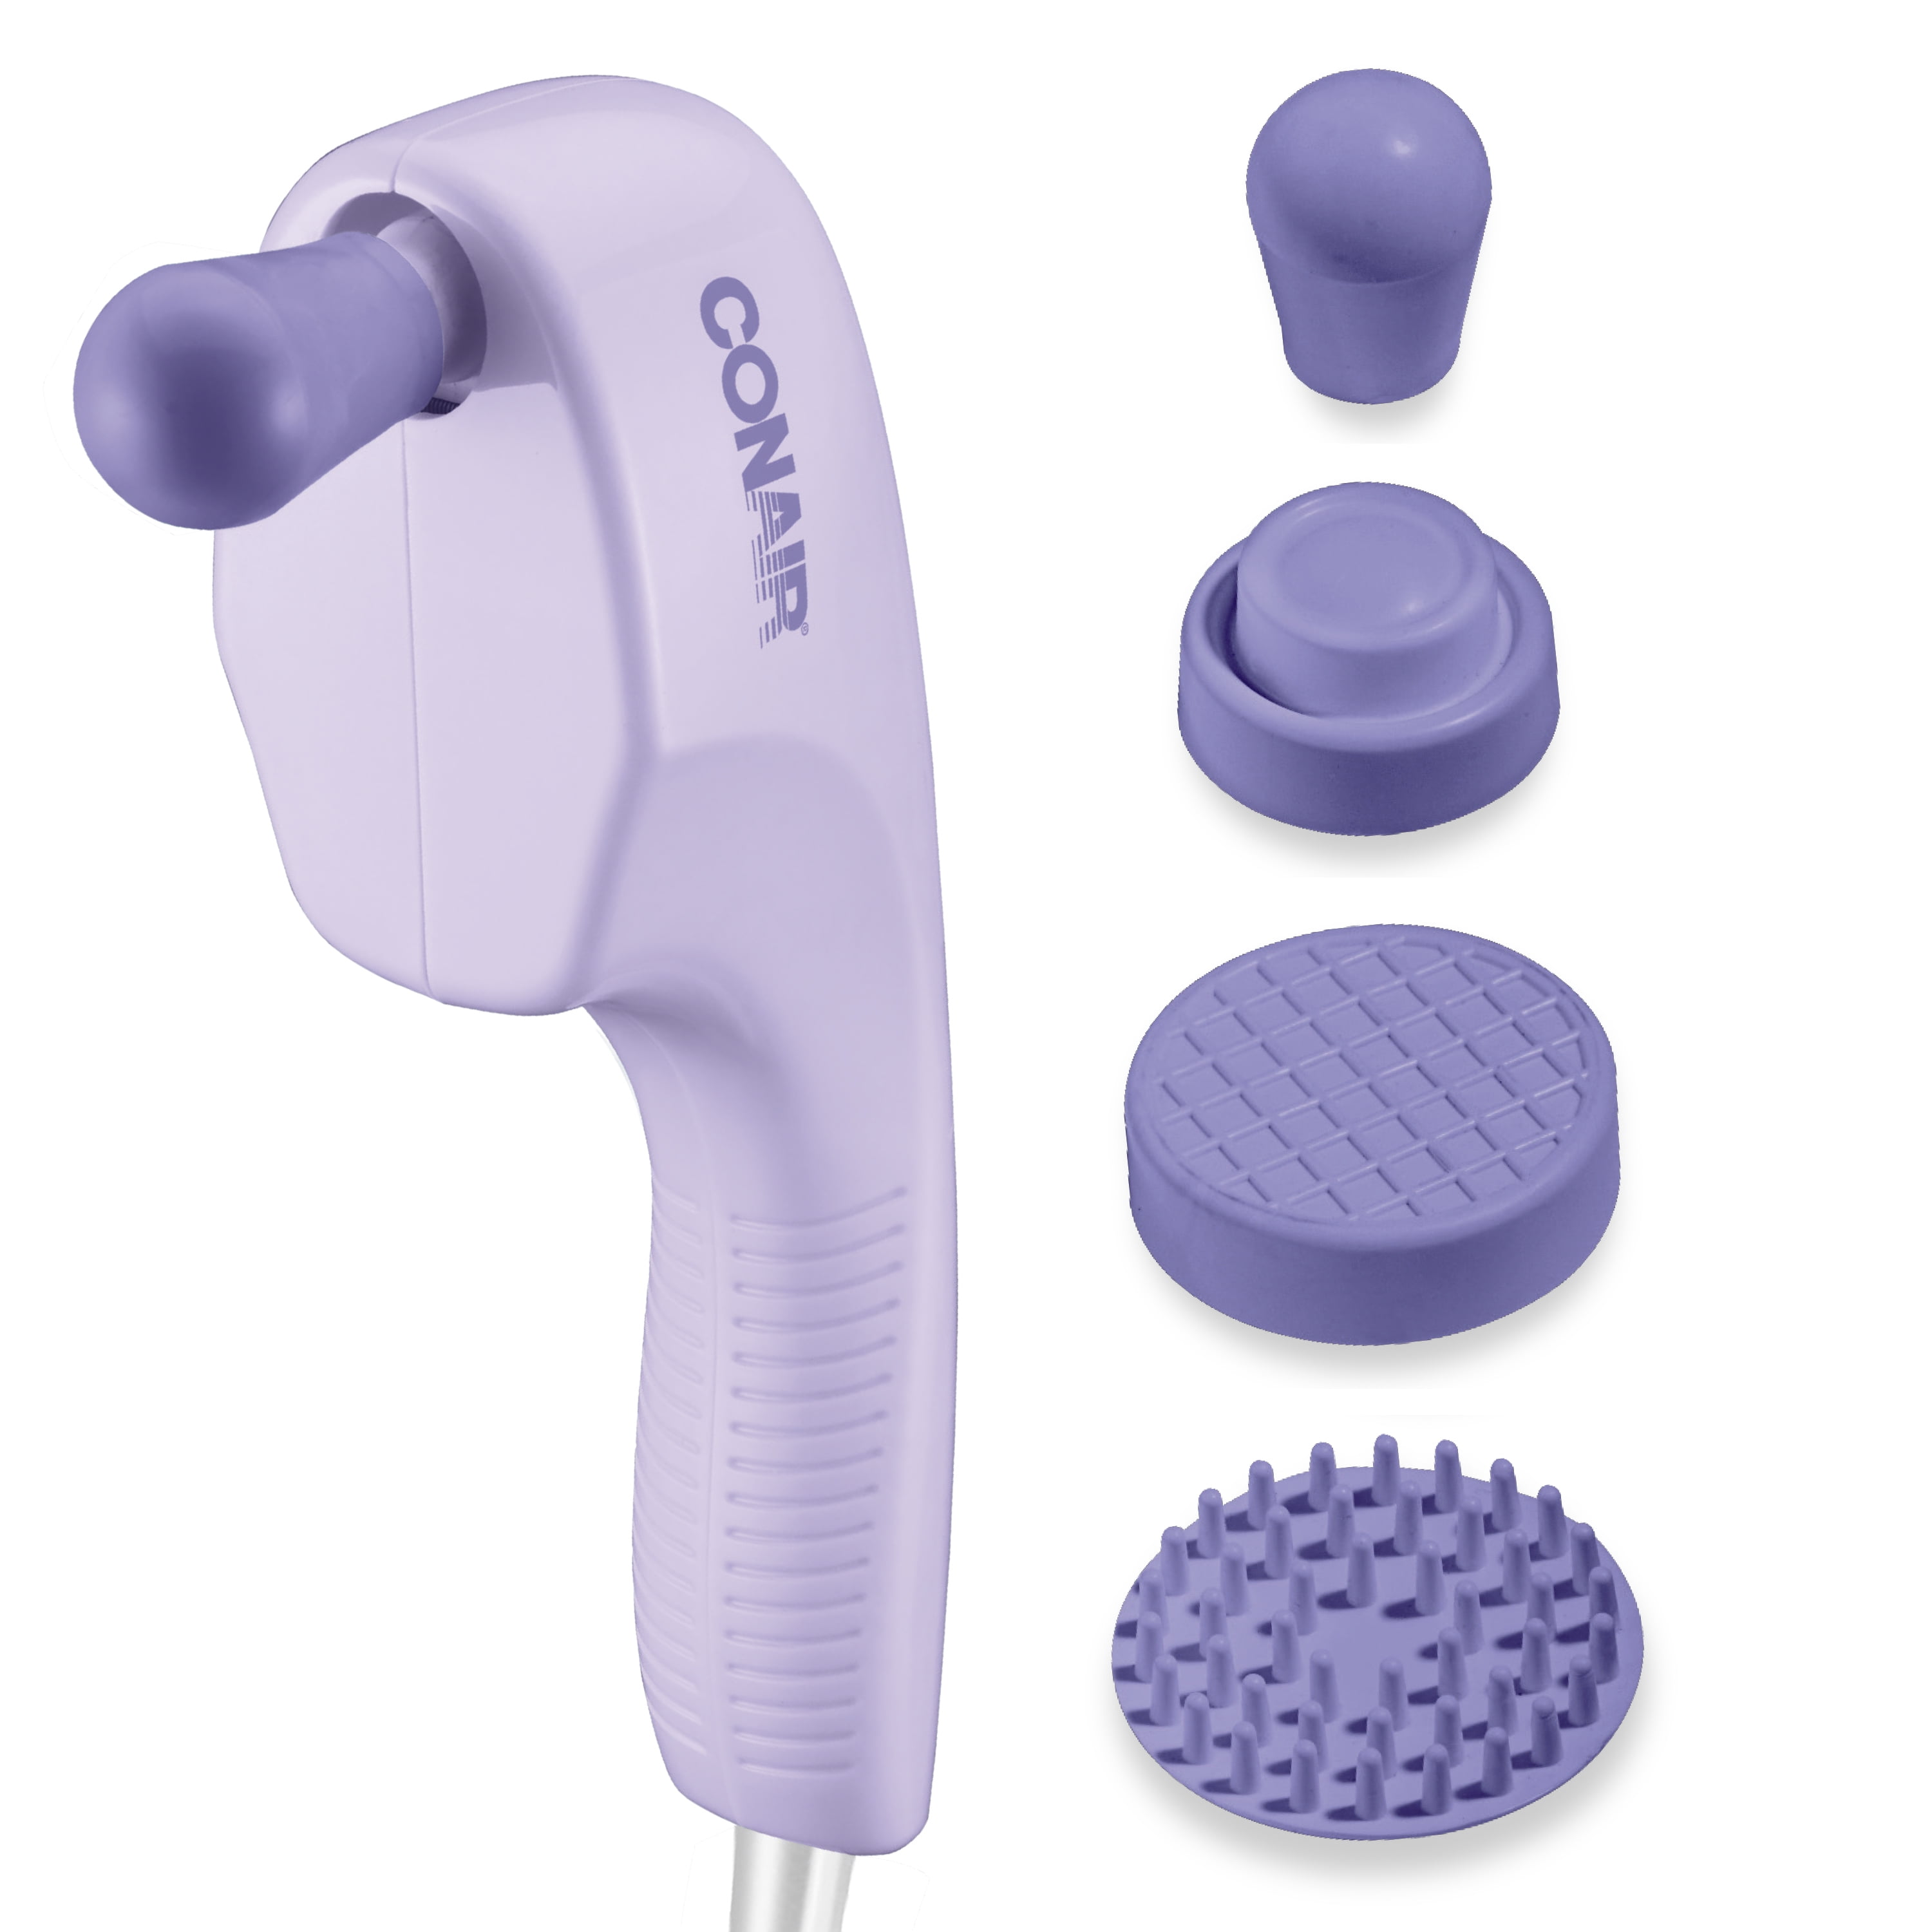 Conaircare® Touch N Tone Handheld Massager W 4 Attachments Lavender Hm8wl22